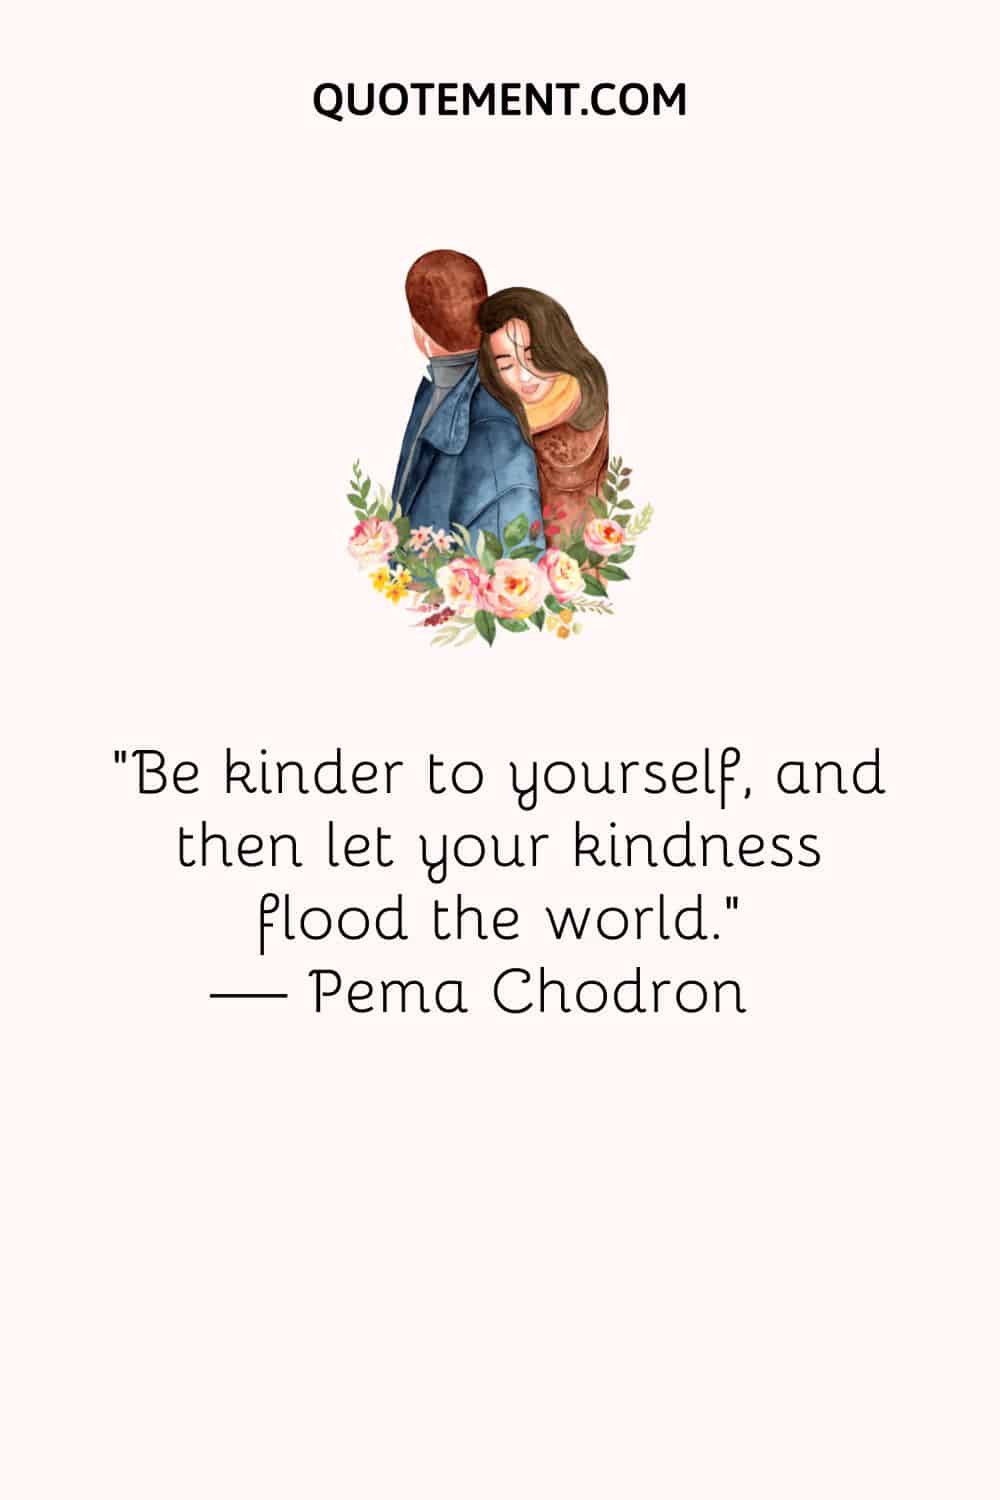 Be kinder to yourself, and then let your kindness flood the world